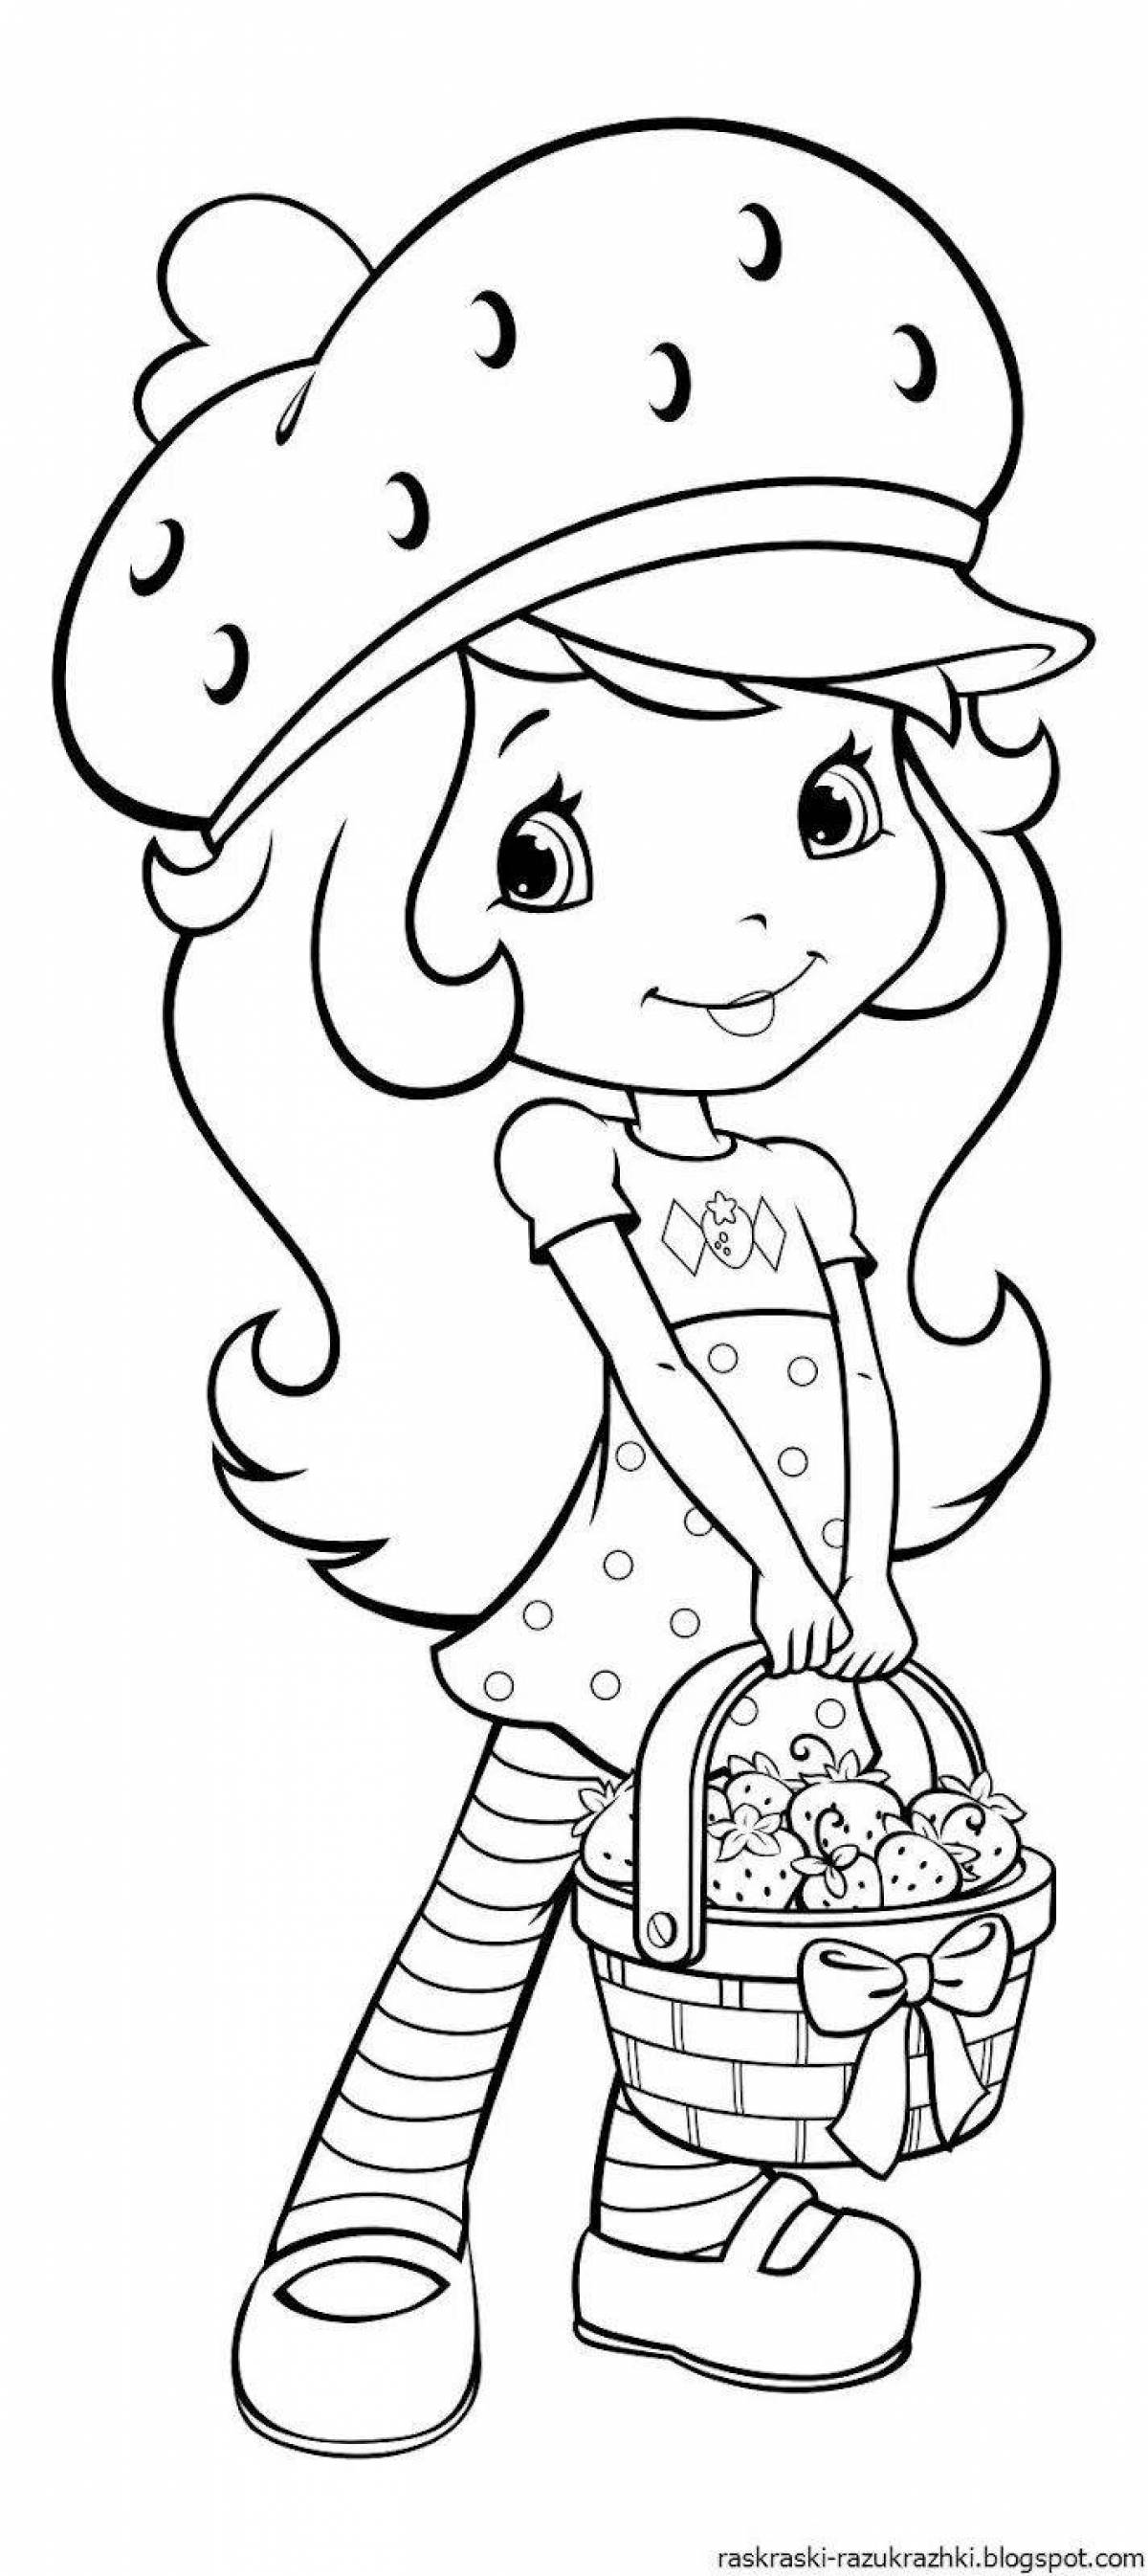 Coloring book excited strawberry